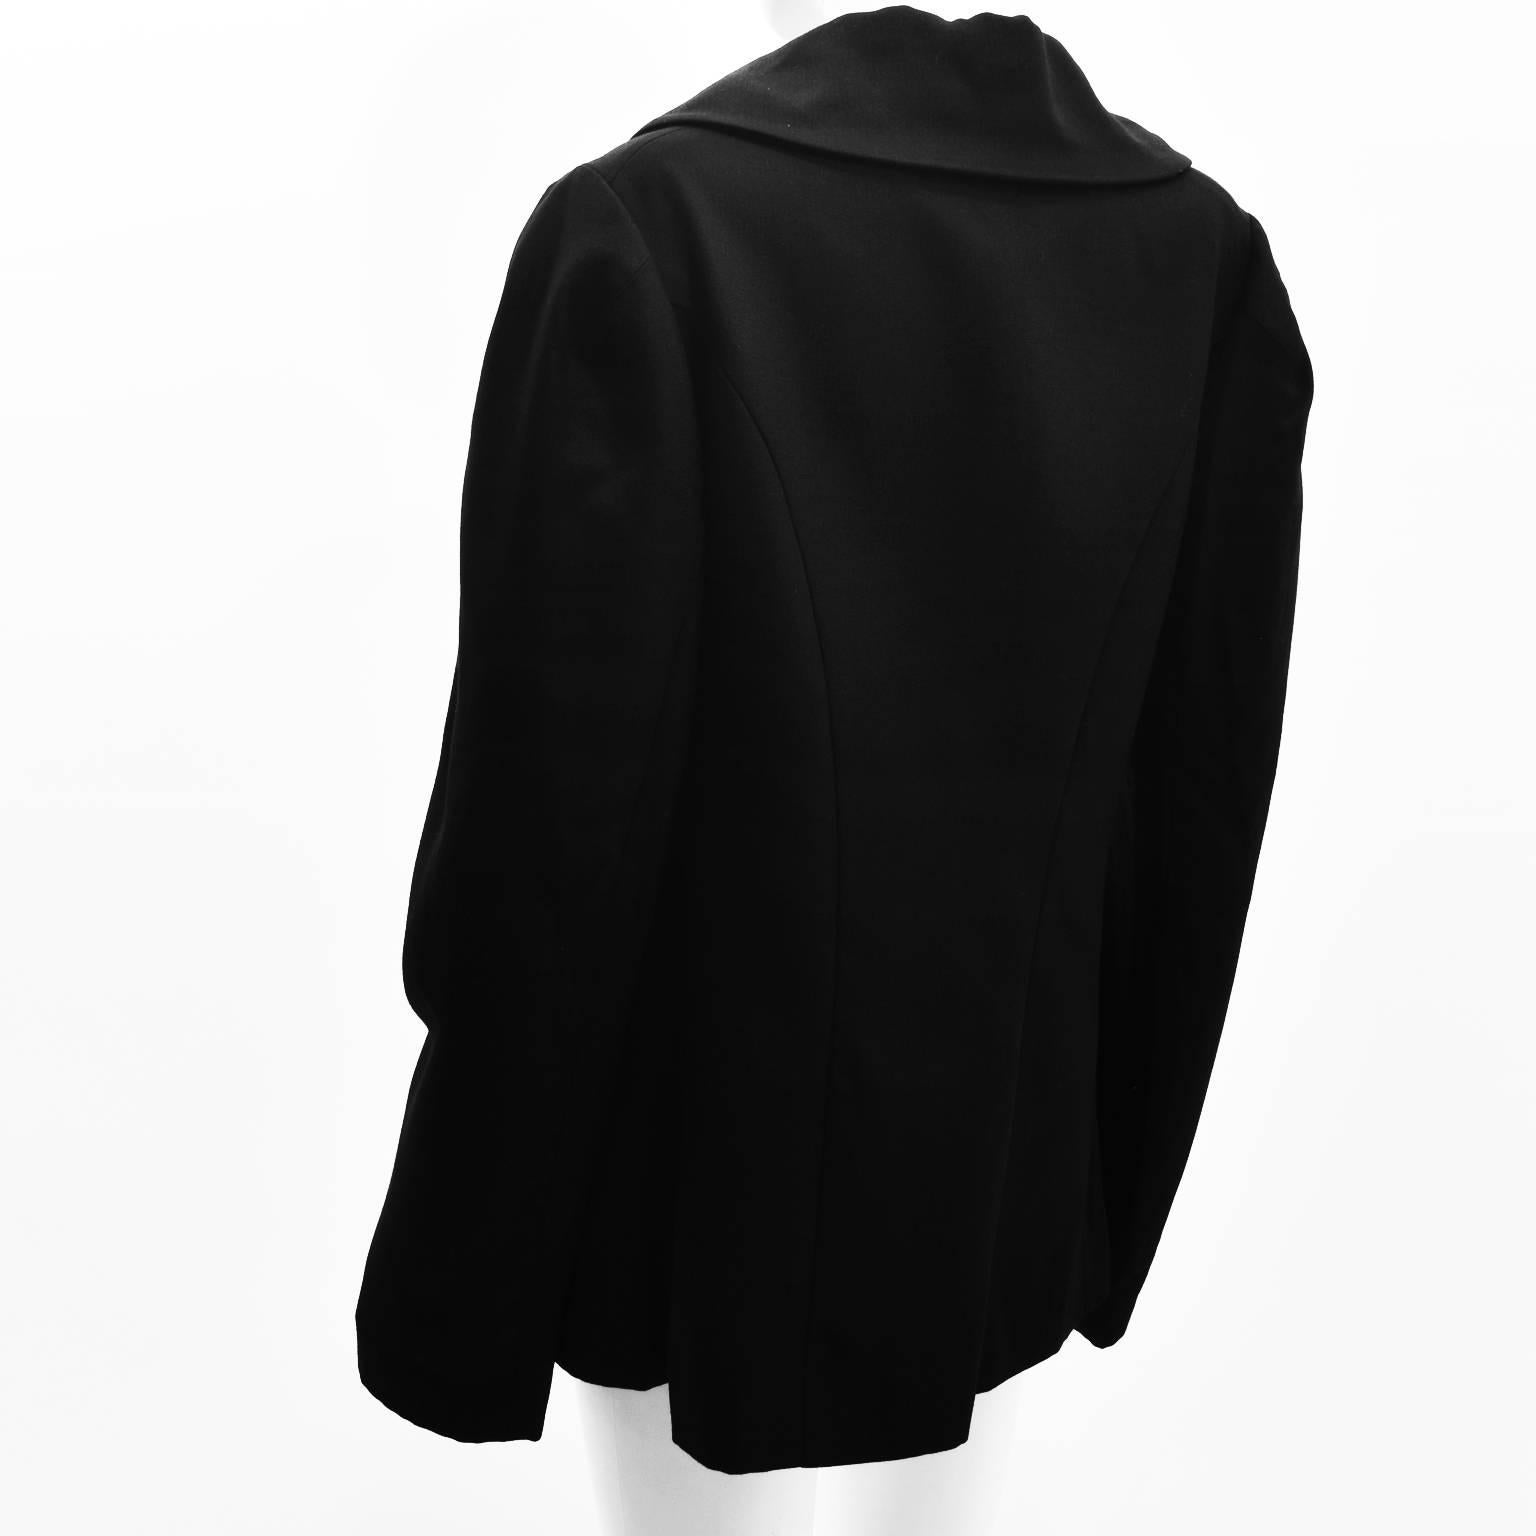 Women's or Men's Yohji Yamamoto Black Double Breasted Jacket with Round Collar Oversized Sleeves For Sale